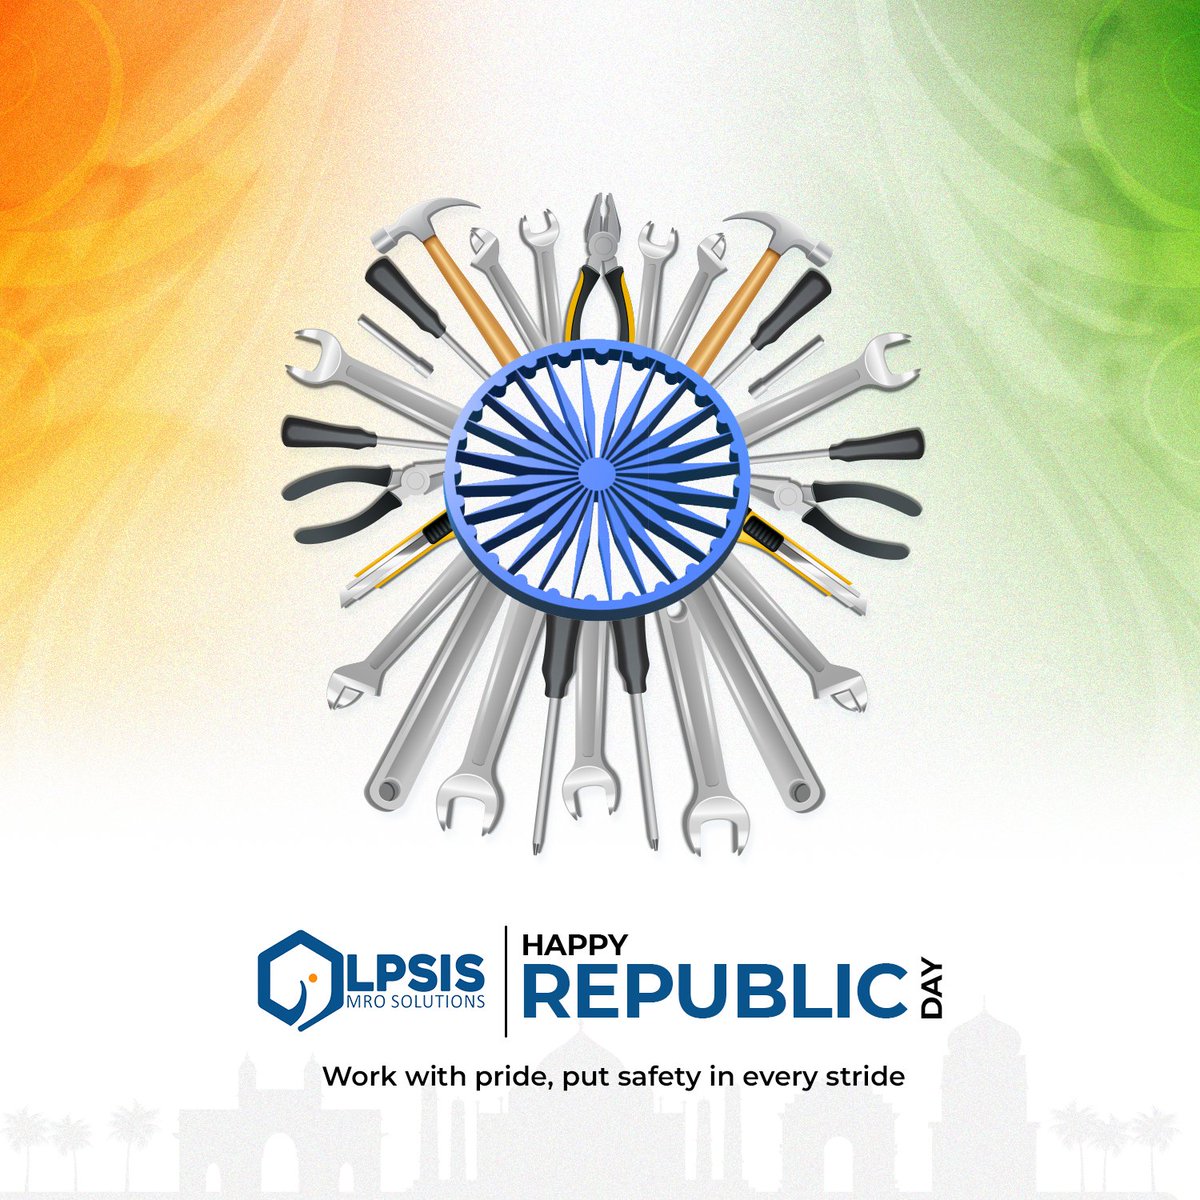 Happy Republic Day

Work with pride, put safety in every stride
.
.
#HappyRepublicDay #RepublicDay #74thRepublicDayOfIndia #National #Patriots #Indian #26thJanuary #India #RepublicDayIndia #MROSolutions #IndustrialSupplies #SafetyMaterial #QualityFasteners #SafetyProducts #LPSIS